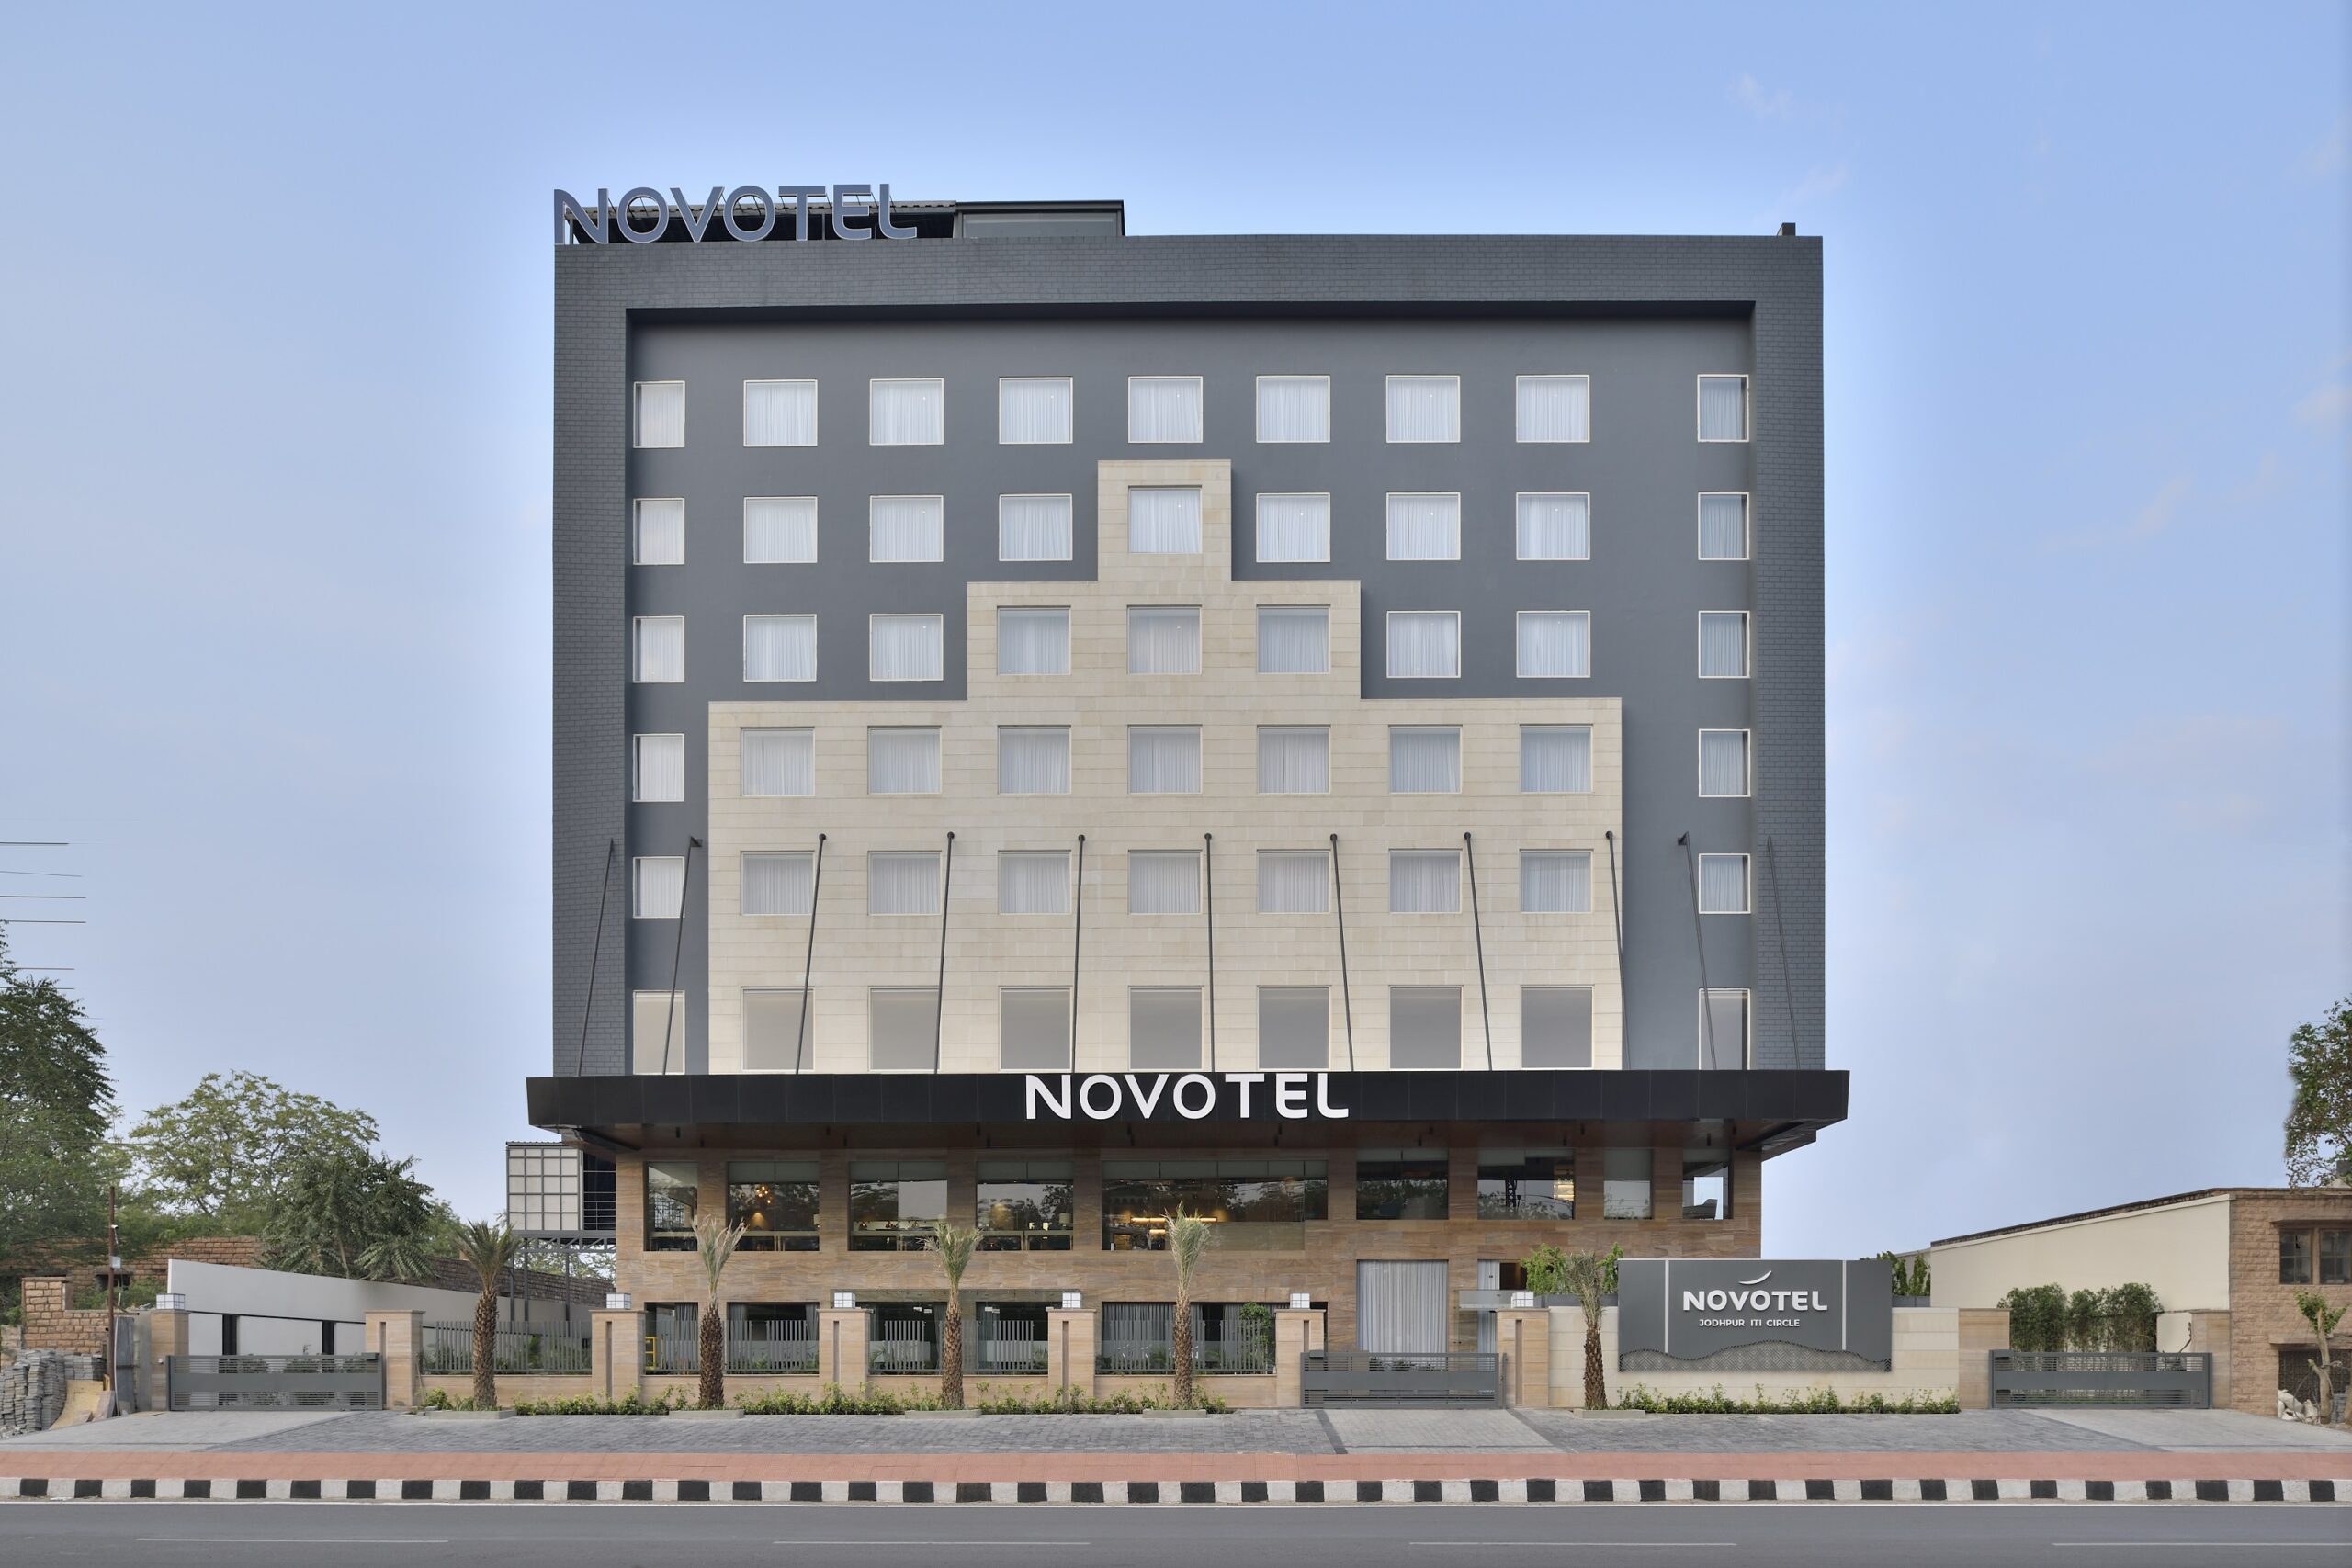 Novotel opens its 23rd property in India in Blue City, Jodhpur